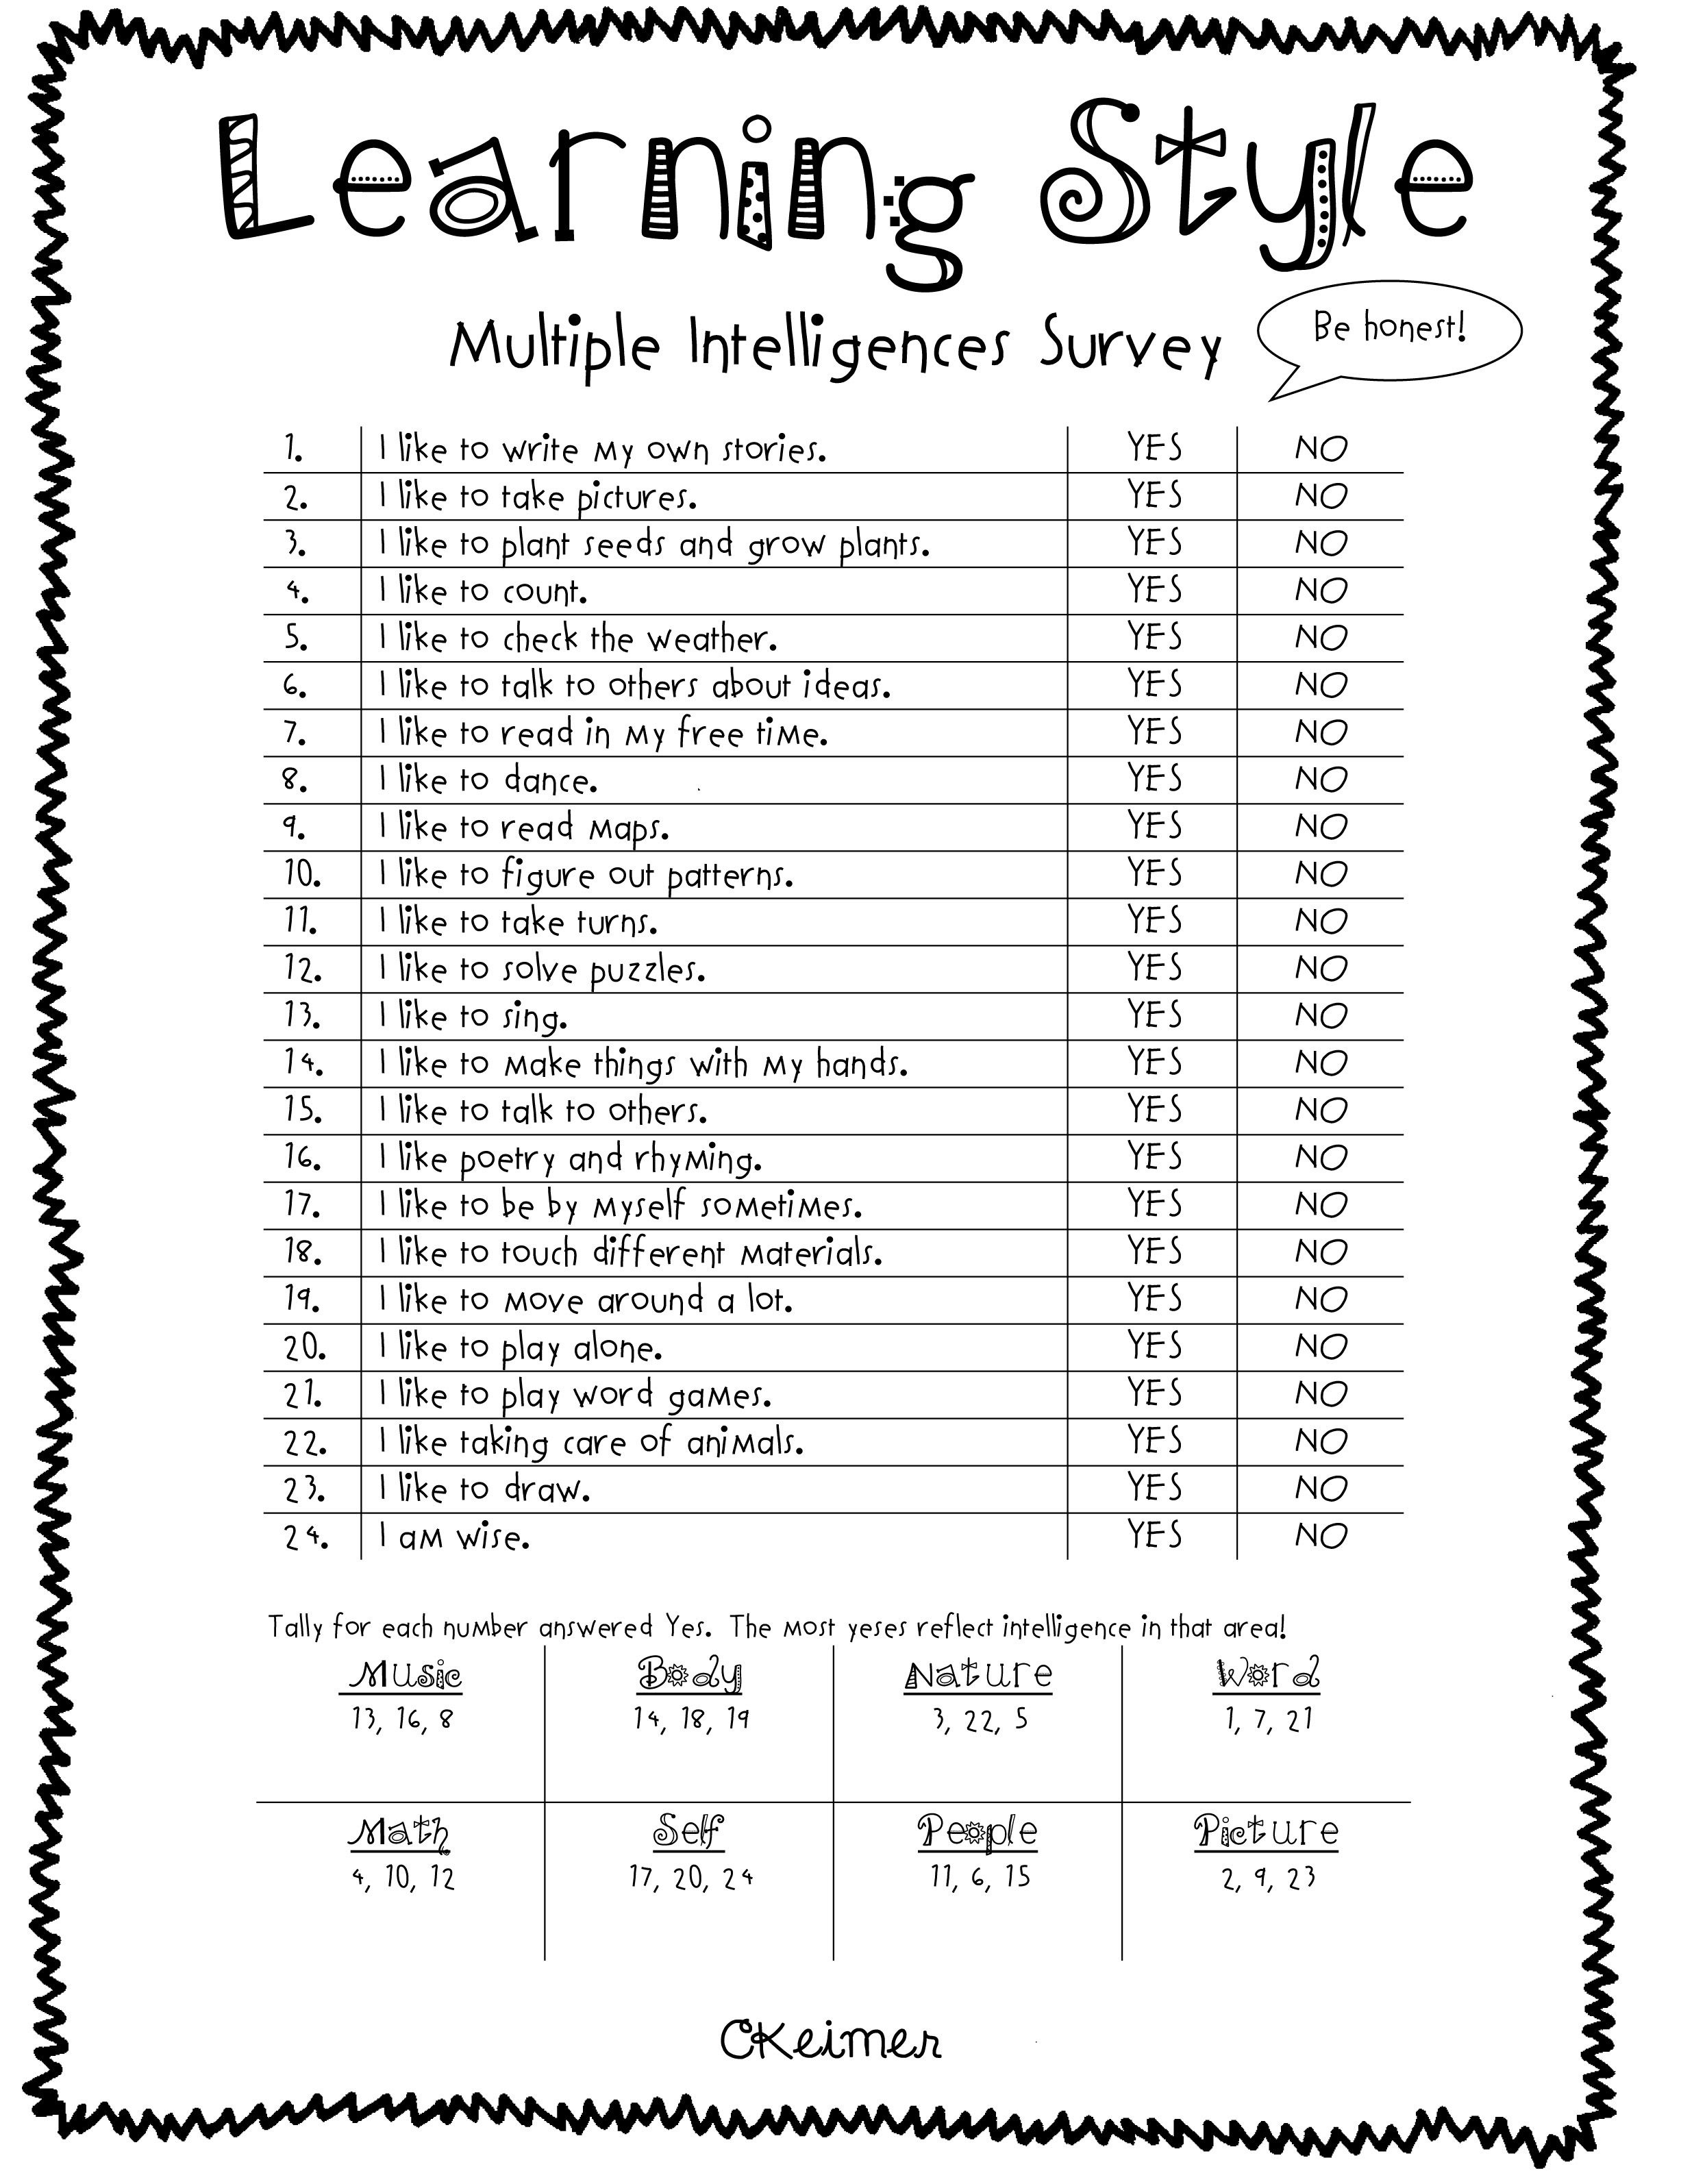 All About Me Activities: A Multiple Intelligences Assessment - Free Learning Style Inventory For Students Printable